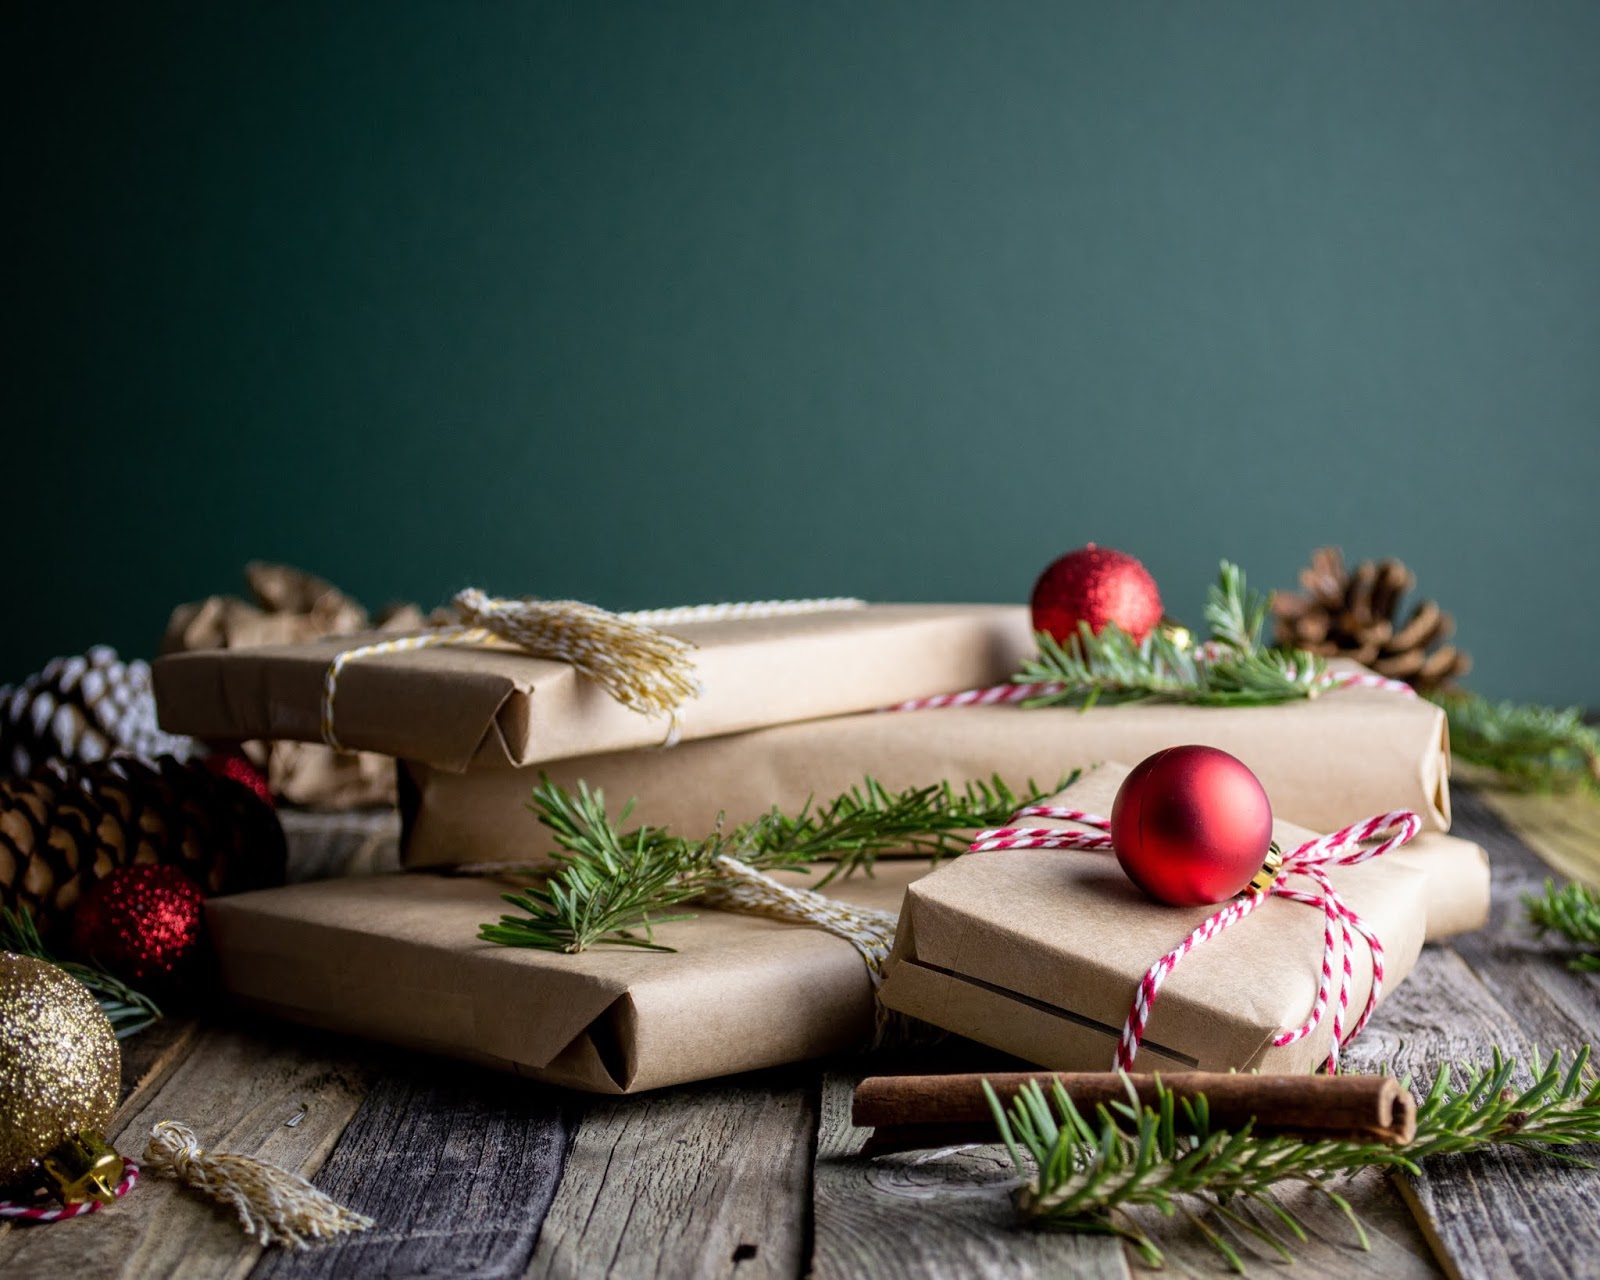 Four presents wrapped in brown paper with red and white ribbon string around them, in front of a teal background, surrounded by sprigs of pine, baubles, and cinnamon sticks.